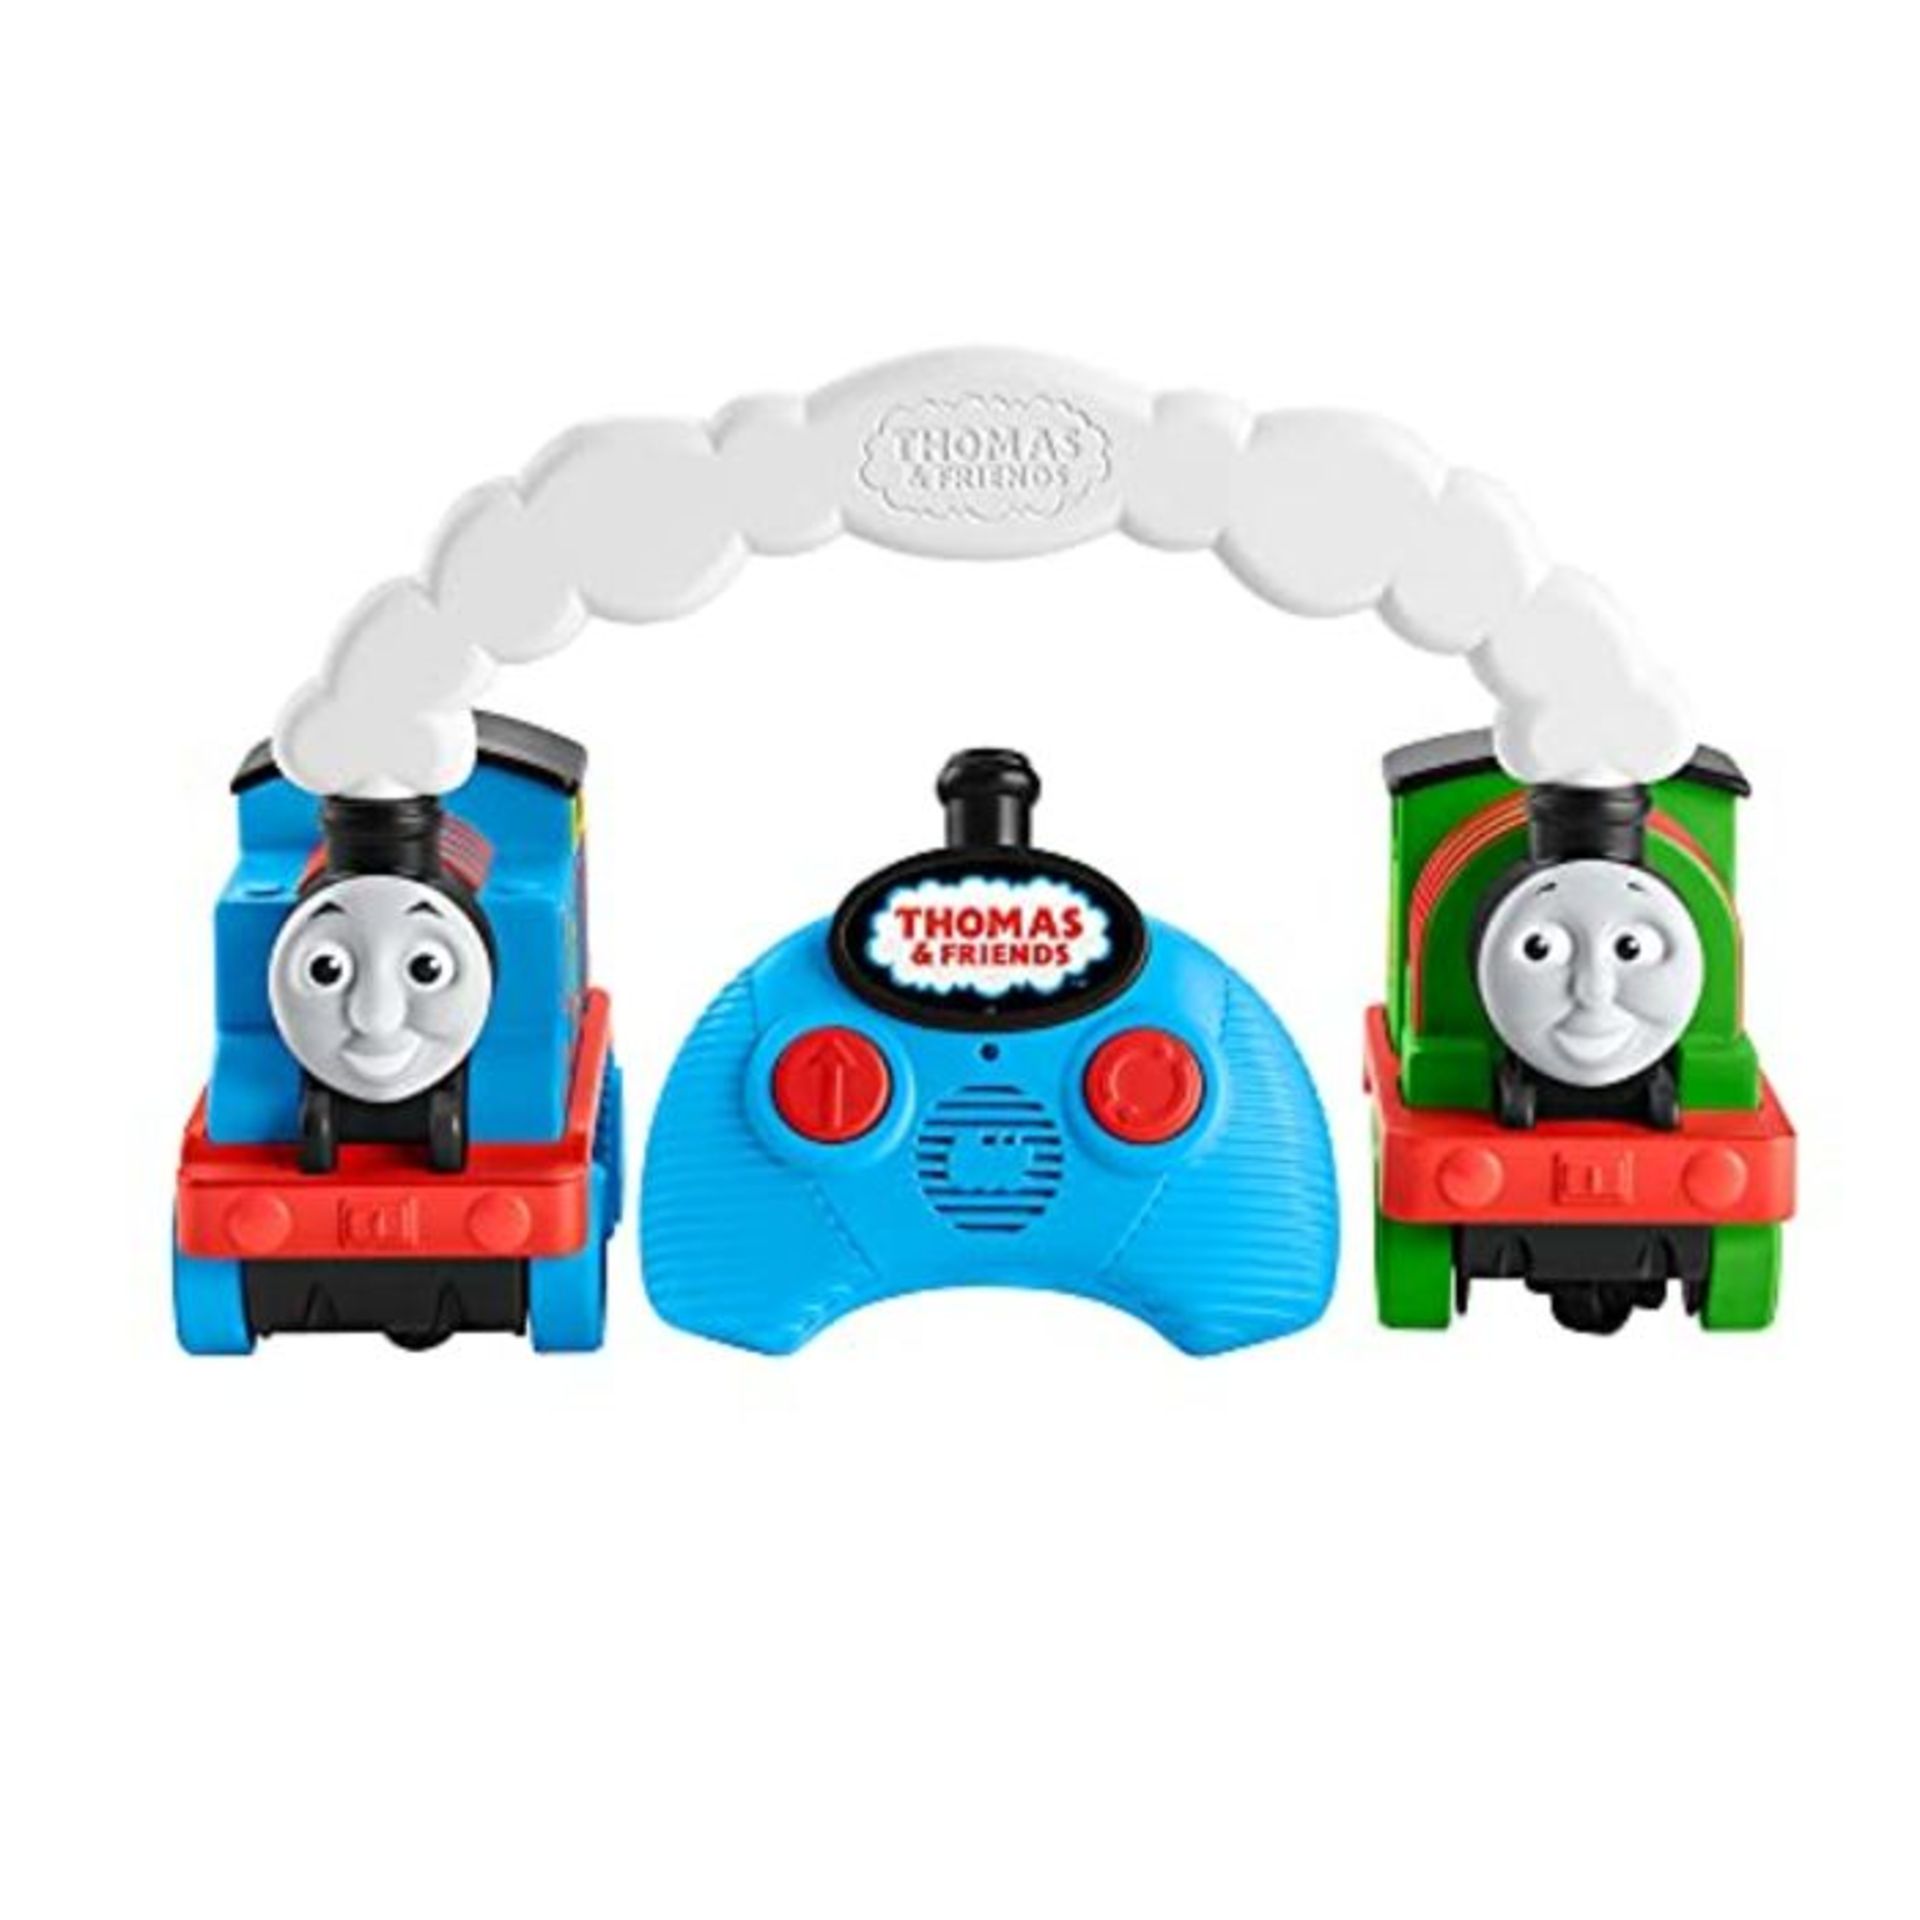 Fisher-Price Thomas & Friends Race & Chase R/C - UK English Edition, remote control